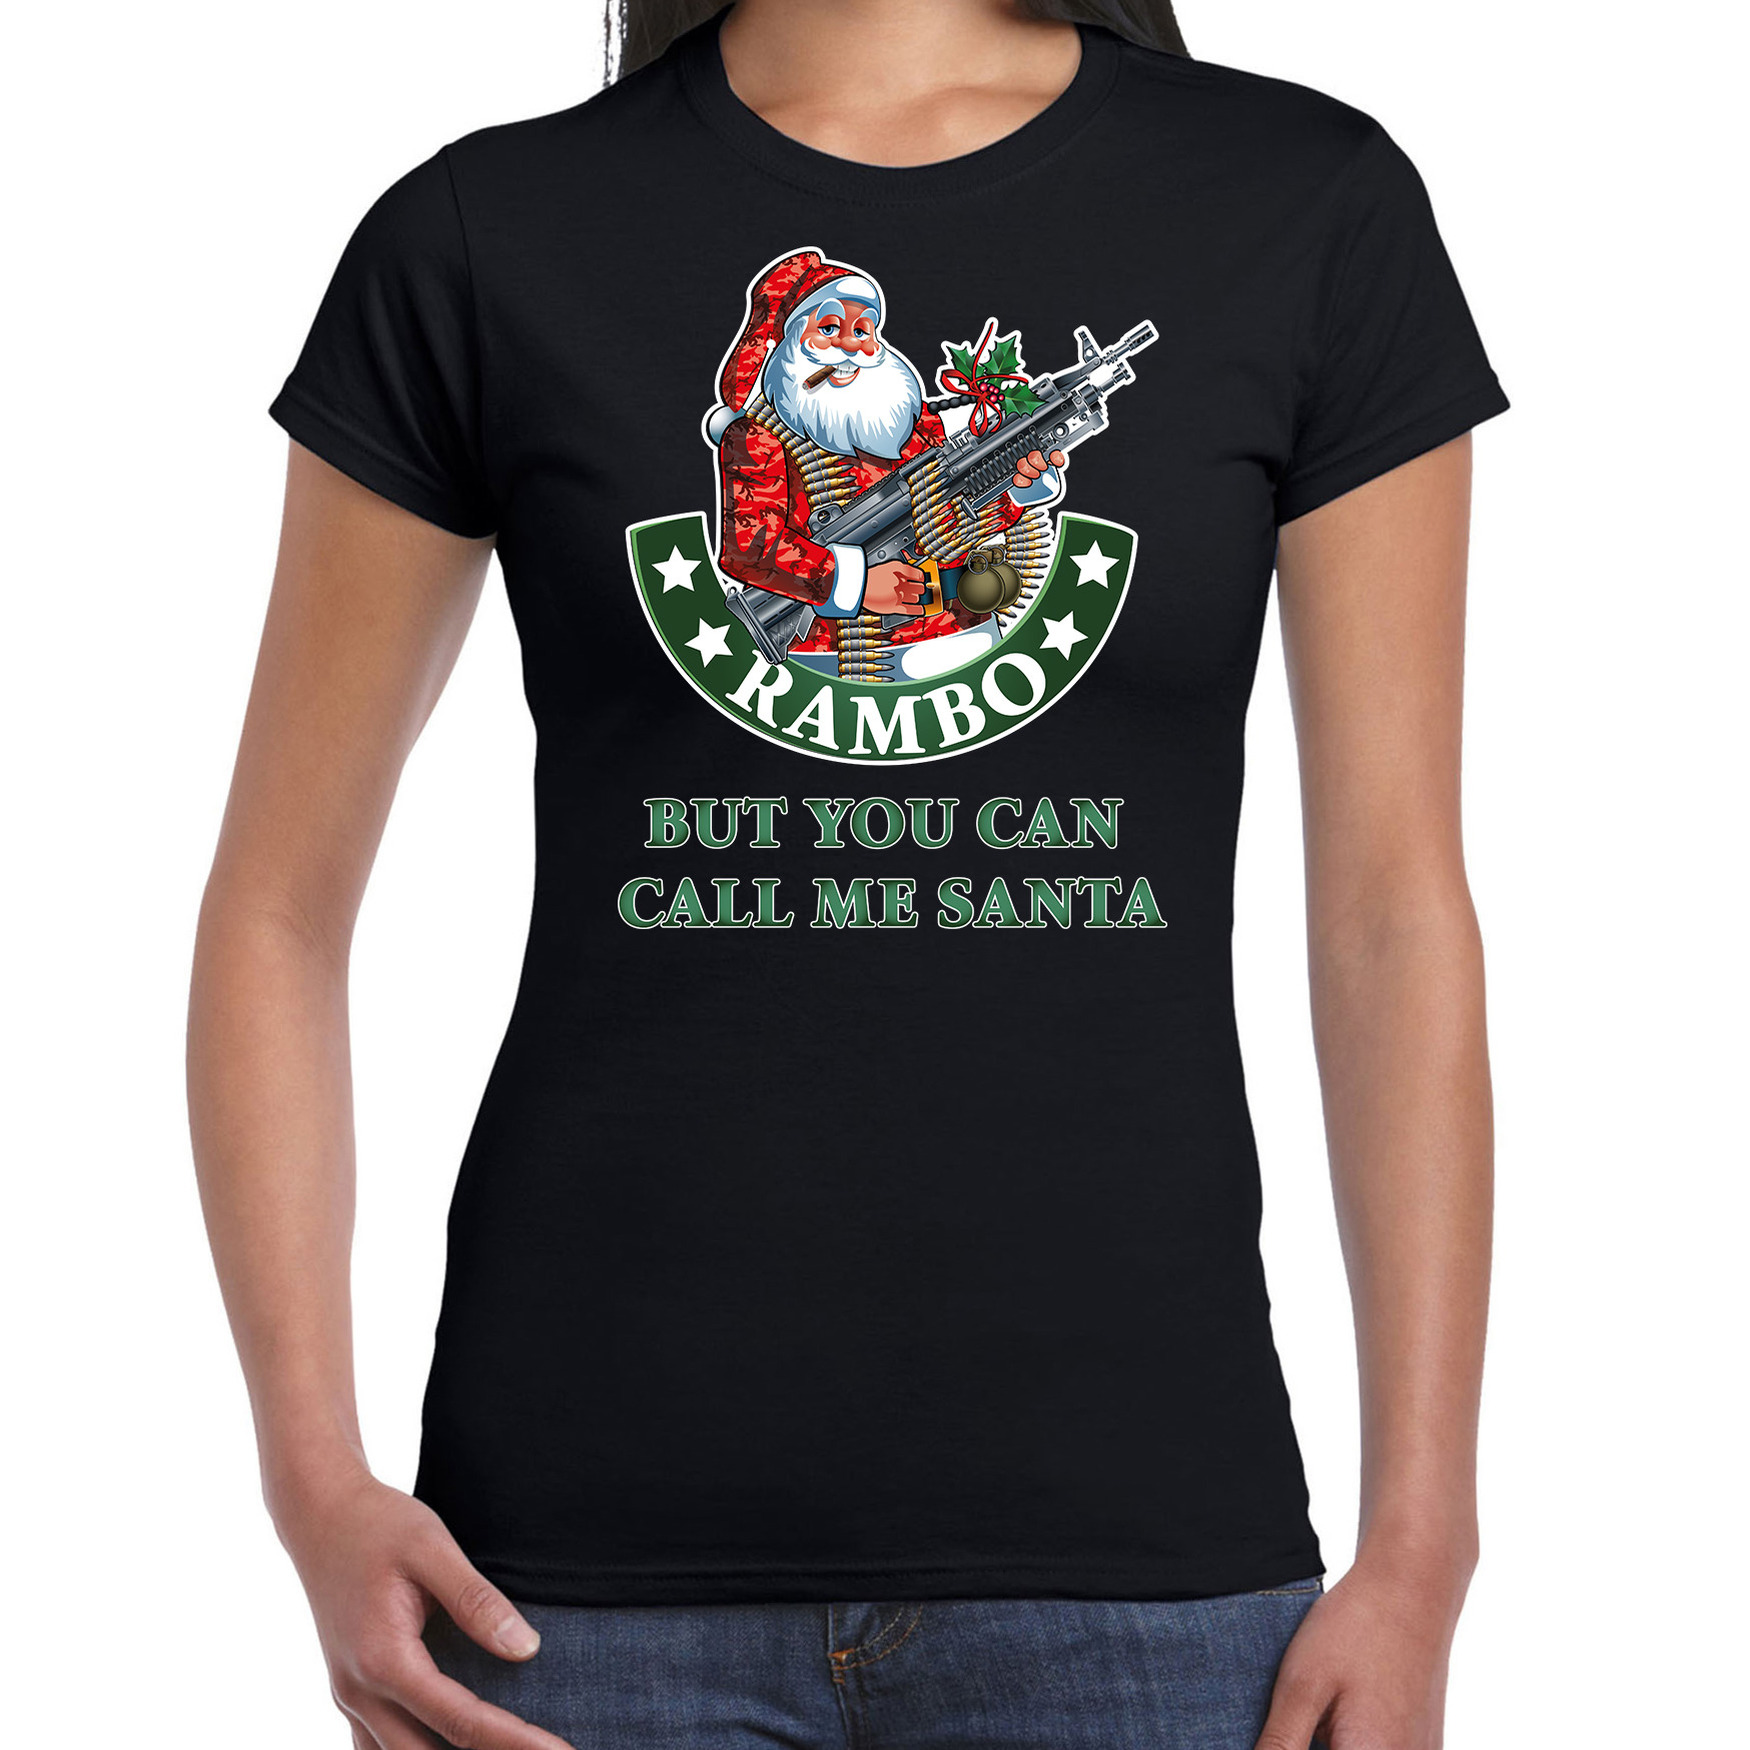 Fout Kerst t-shirt-Kerstkleding Rambo but you can call me Santa voor dames